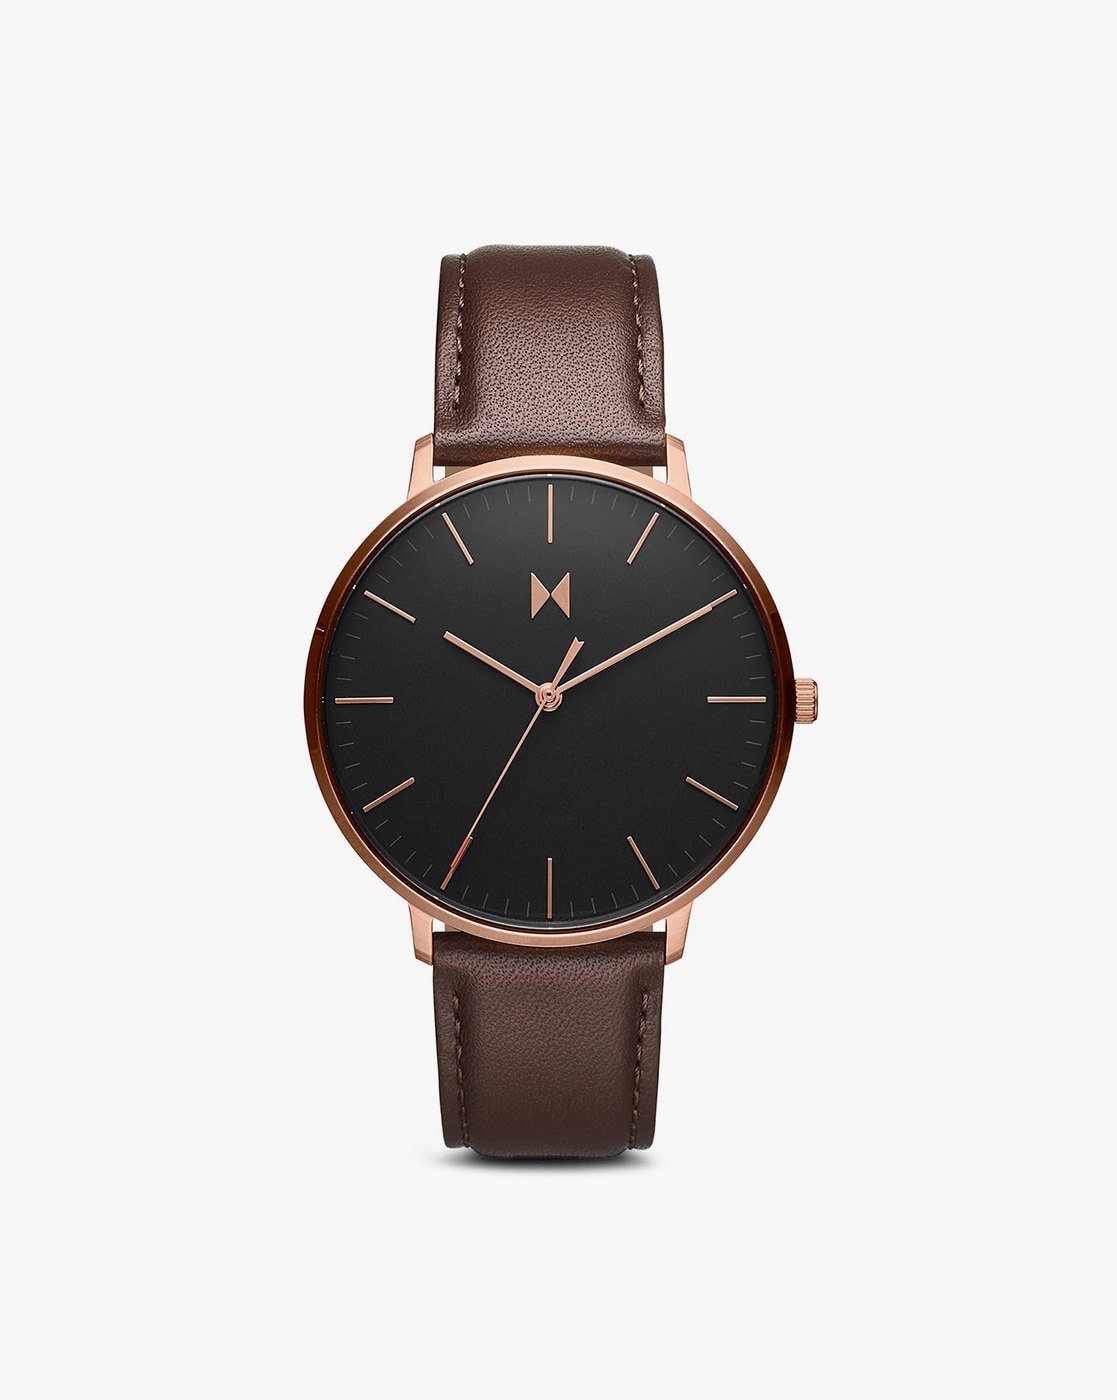 Movado Moves to Buy Millennial Watch Brand MVMT